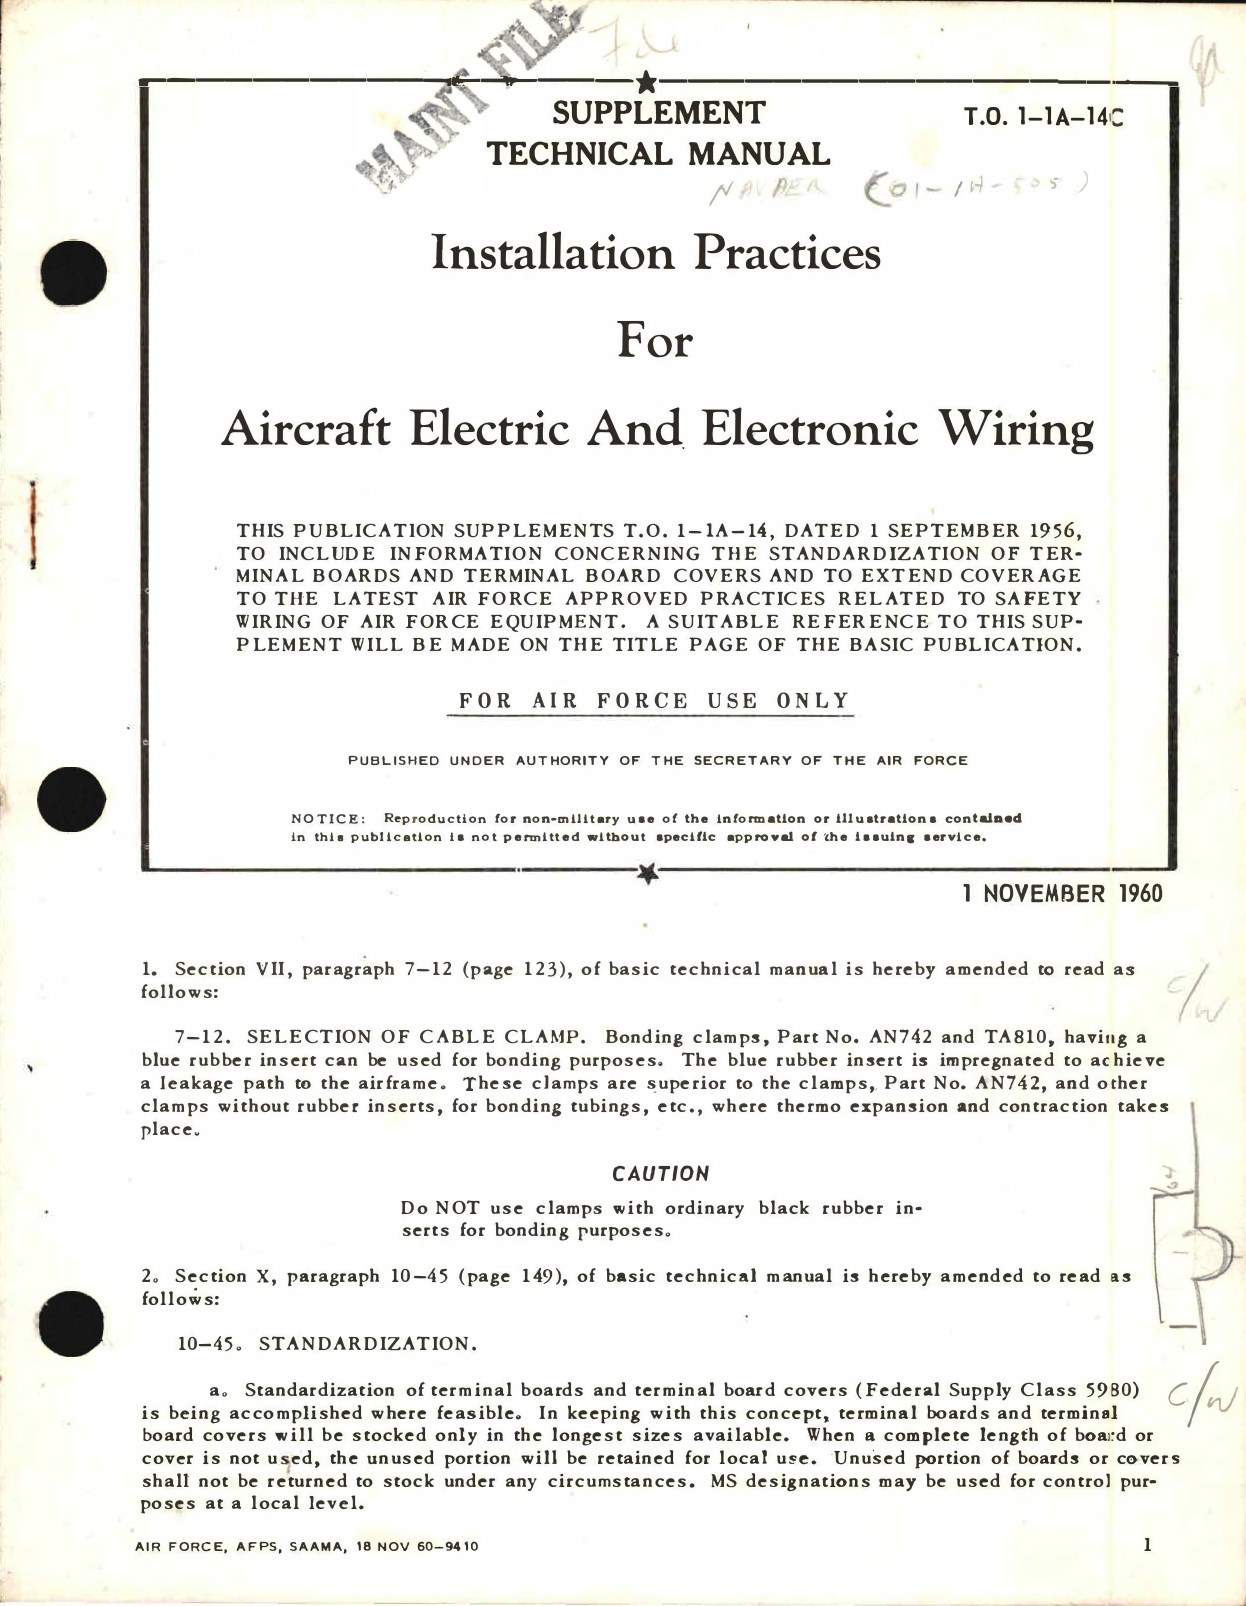 Sample page 1 from AirCorps Library document: Installation Practices for Aircraft Electric & Electronic Wiring